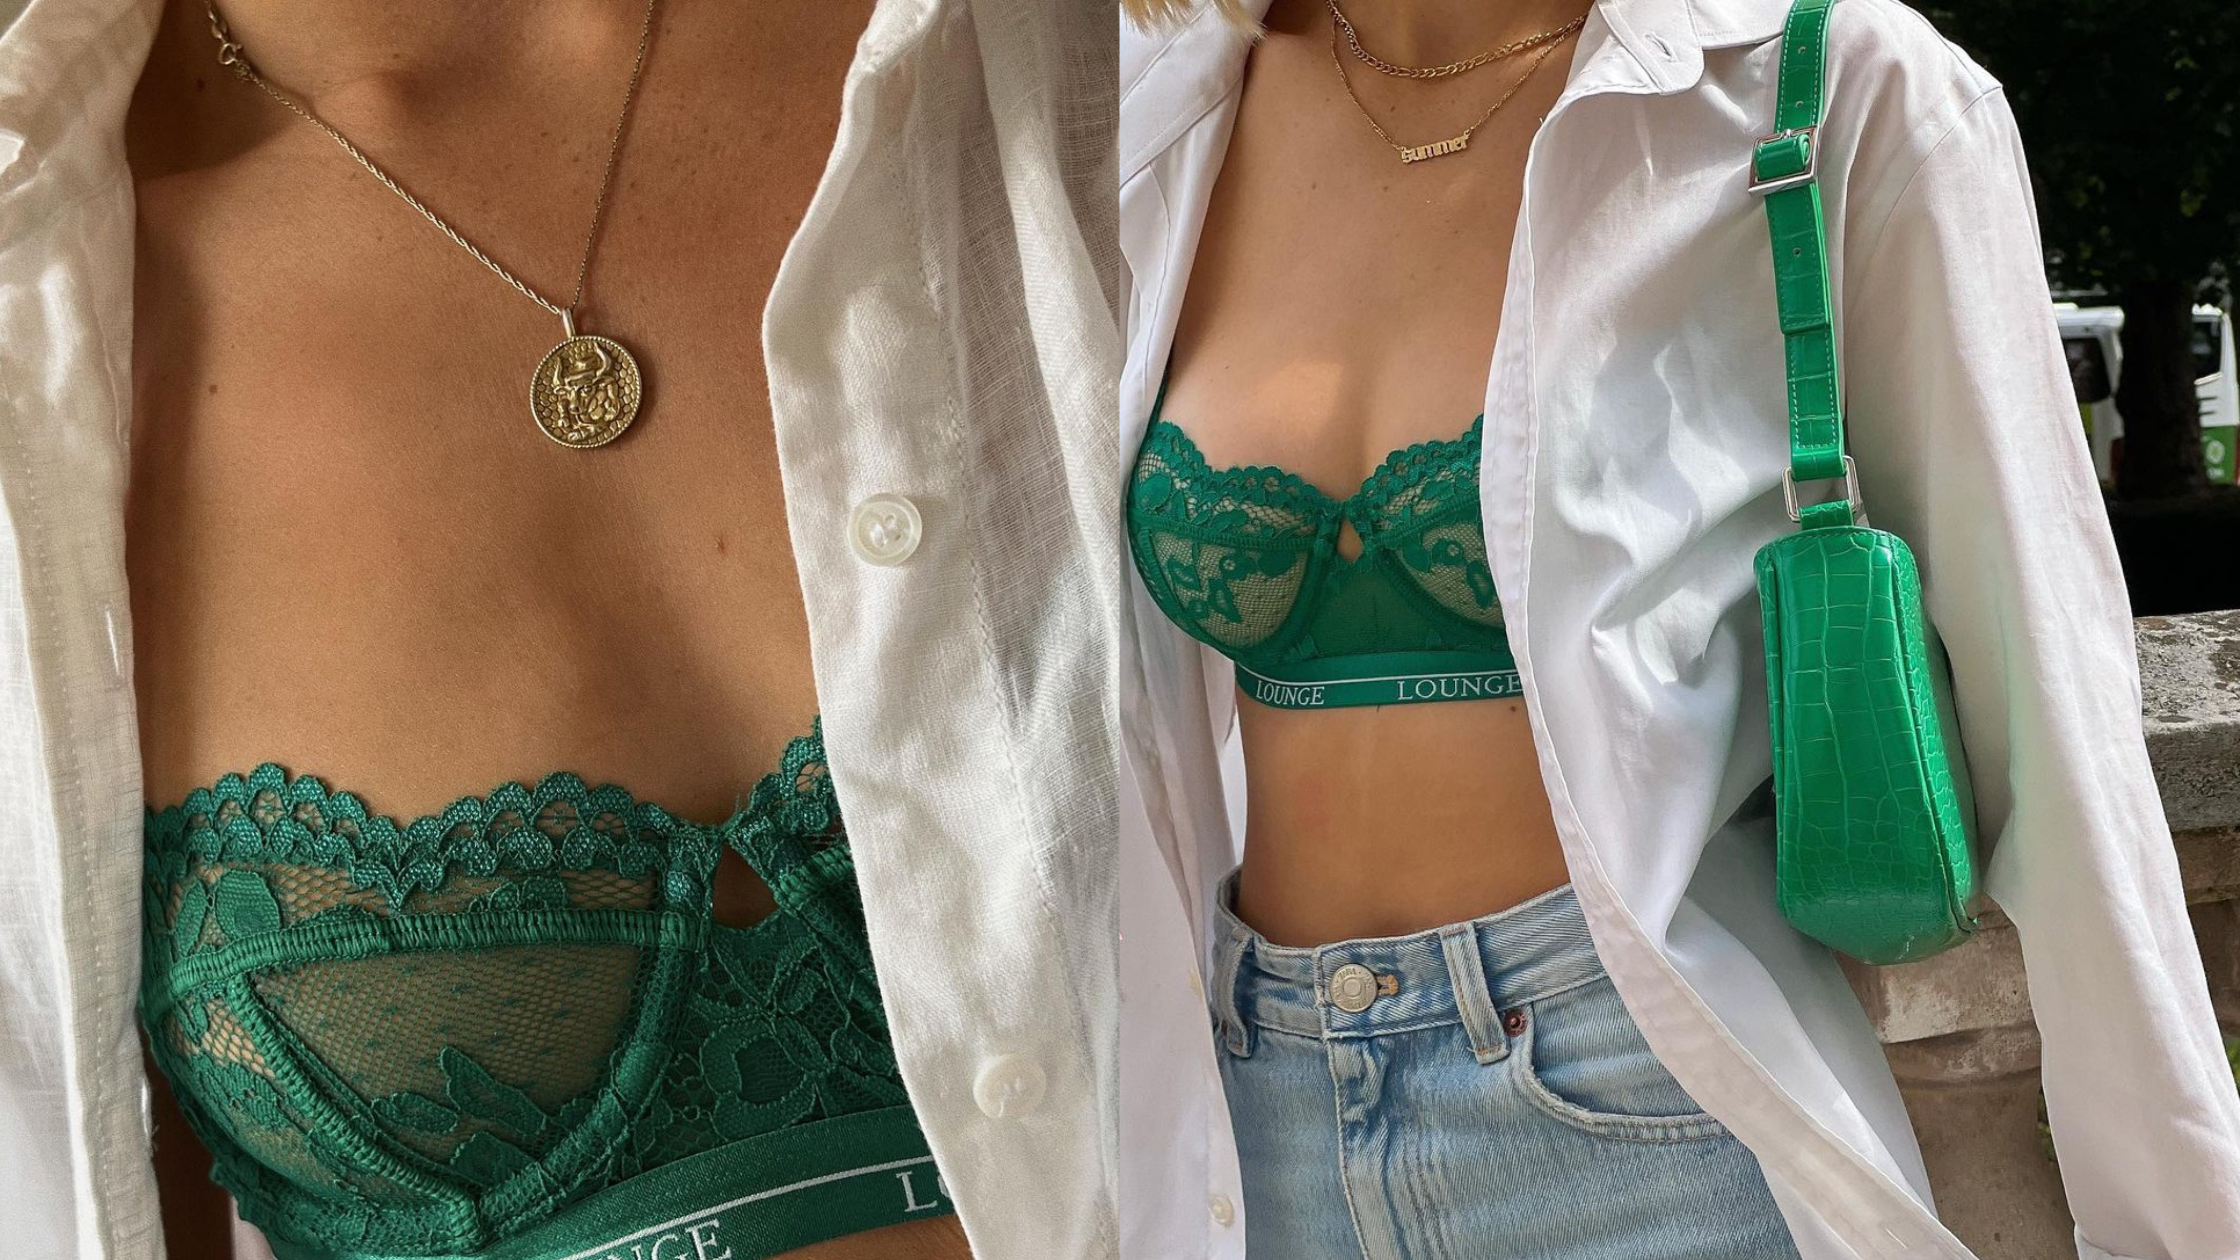 How to Wear Your Bra Over Your Shirt